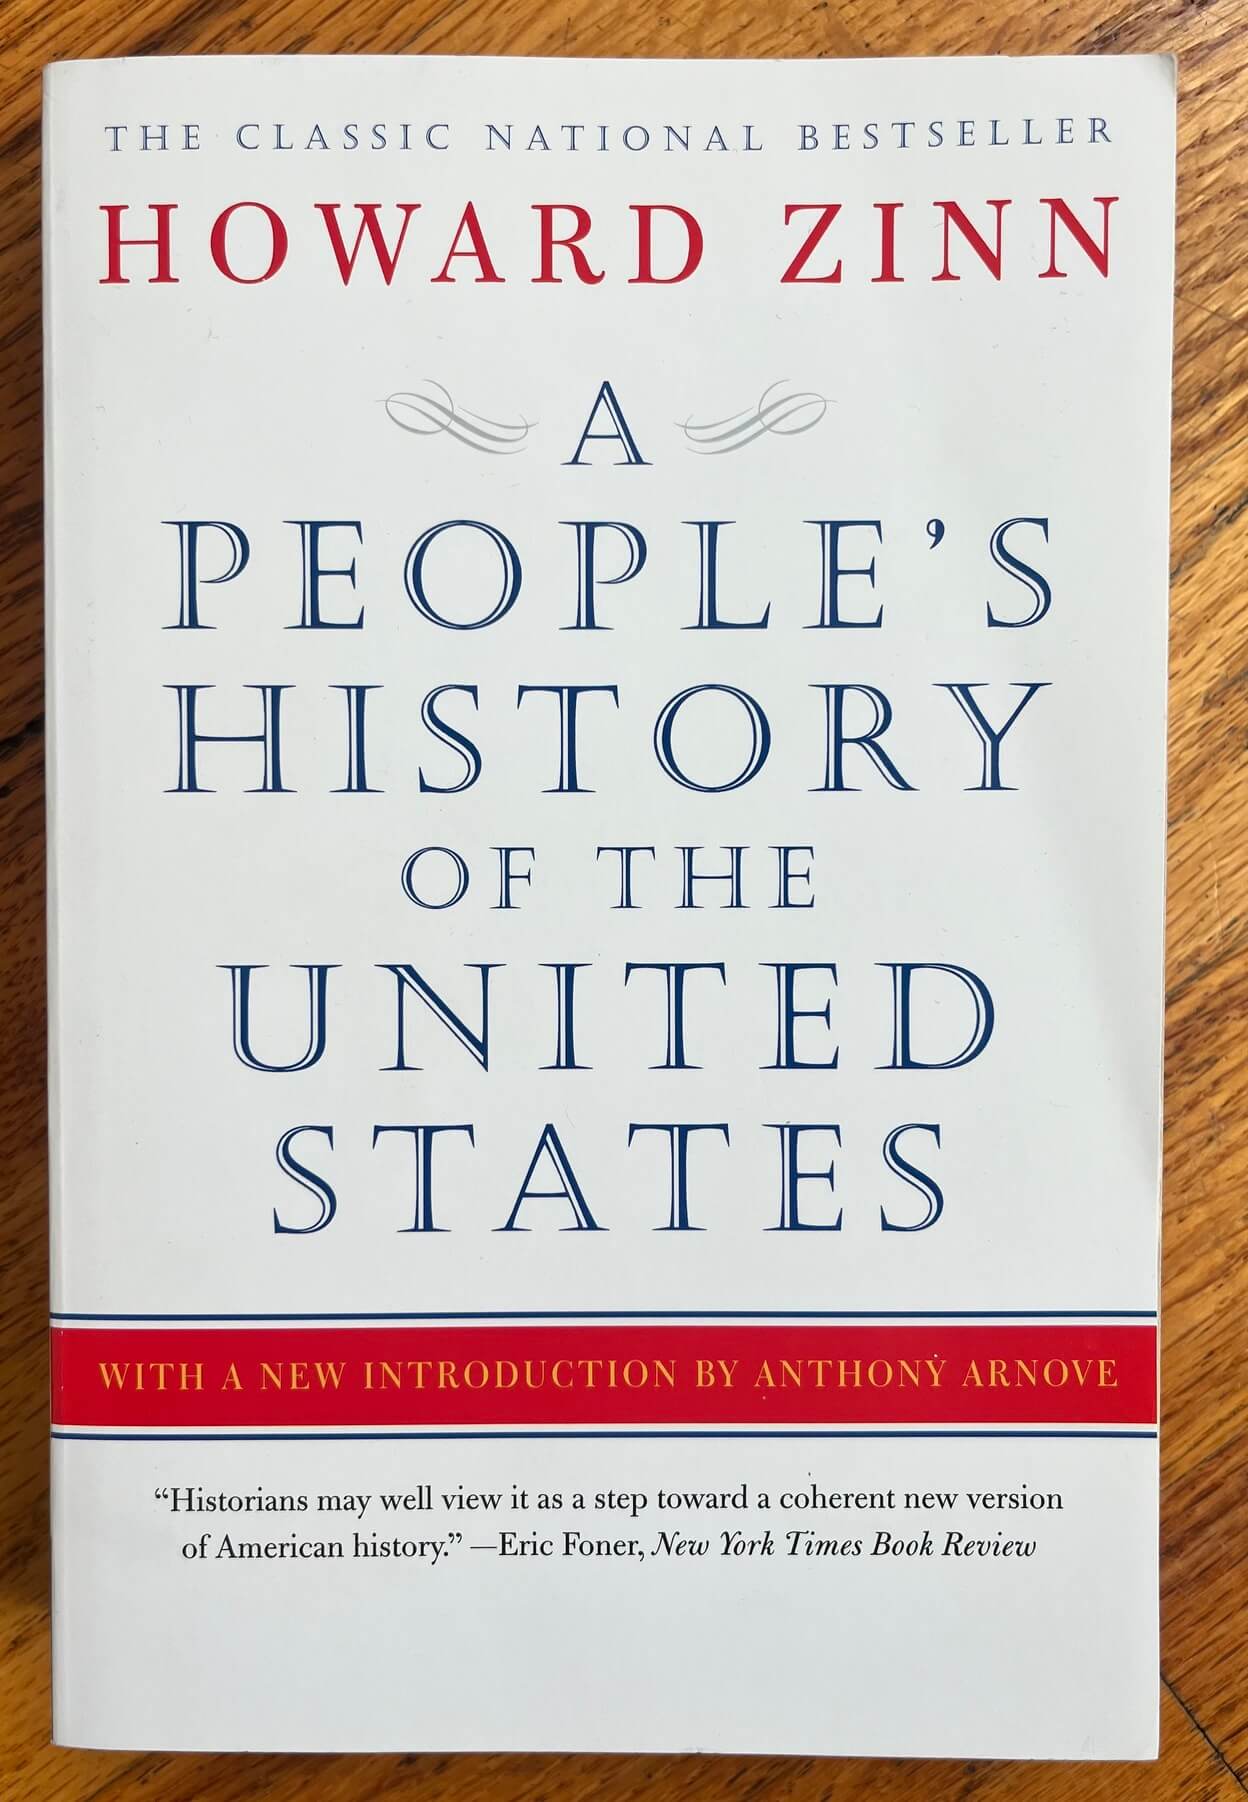 “A People‘s History of the United States” by Howard Zinn